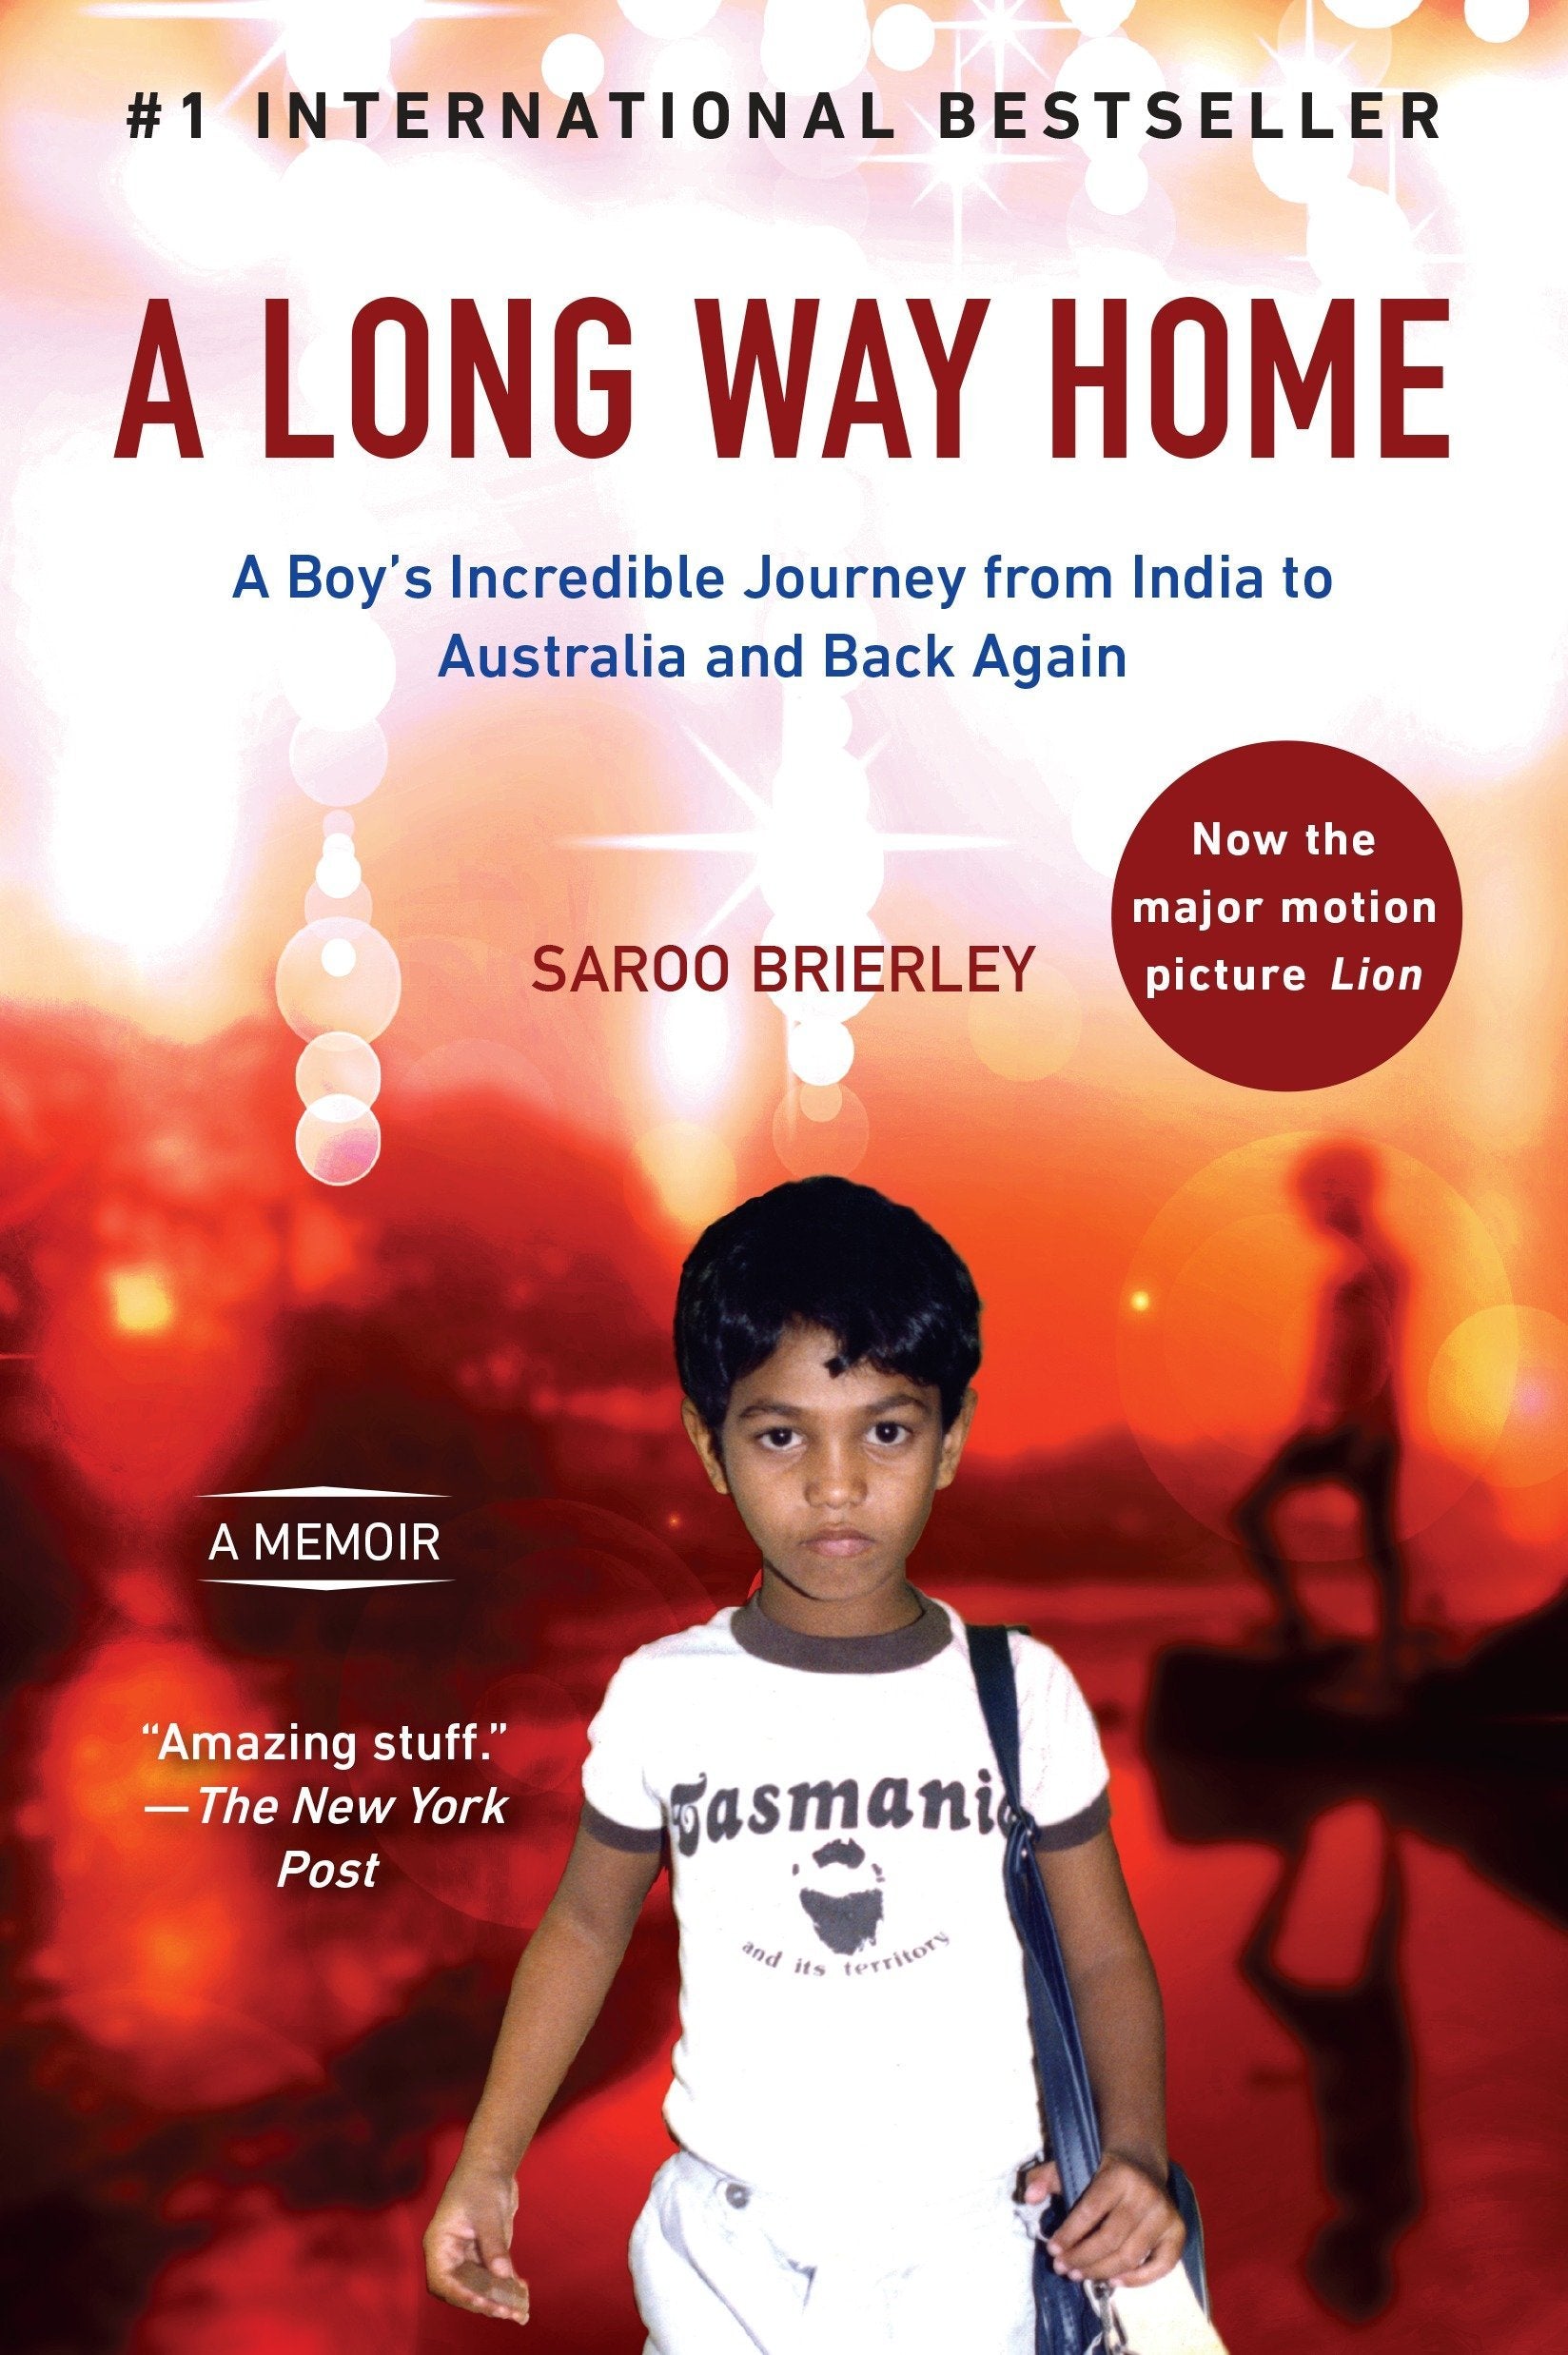 A Long Way Home: A Boy's Incredible Journey from India to Australia and Back Again by Saroo Brierley